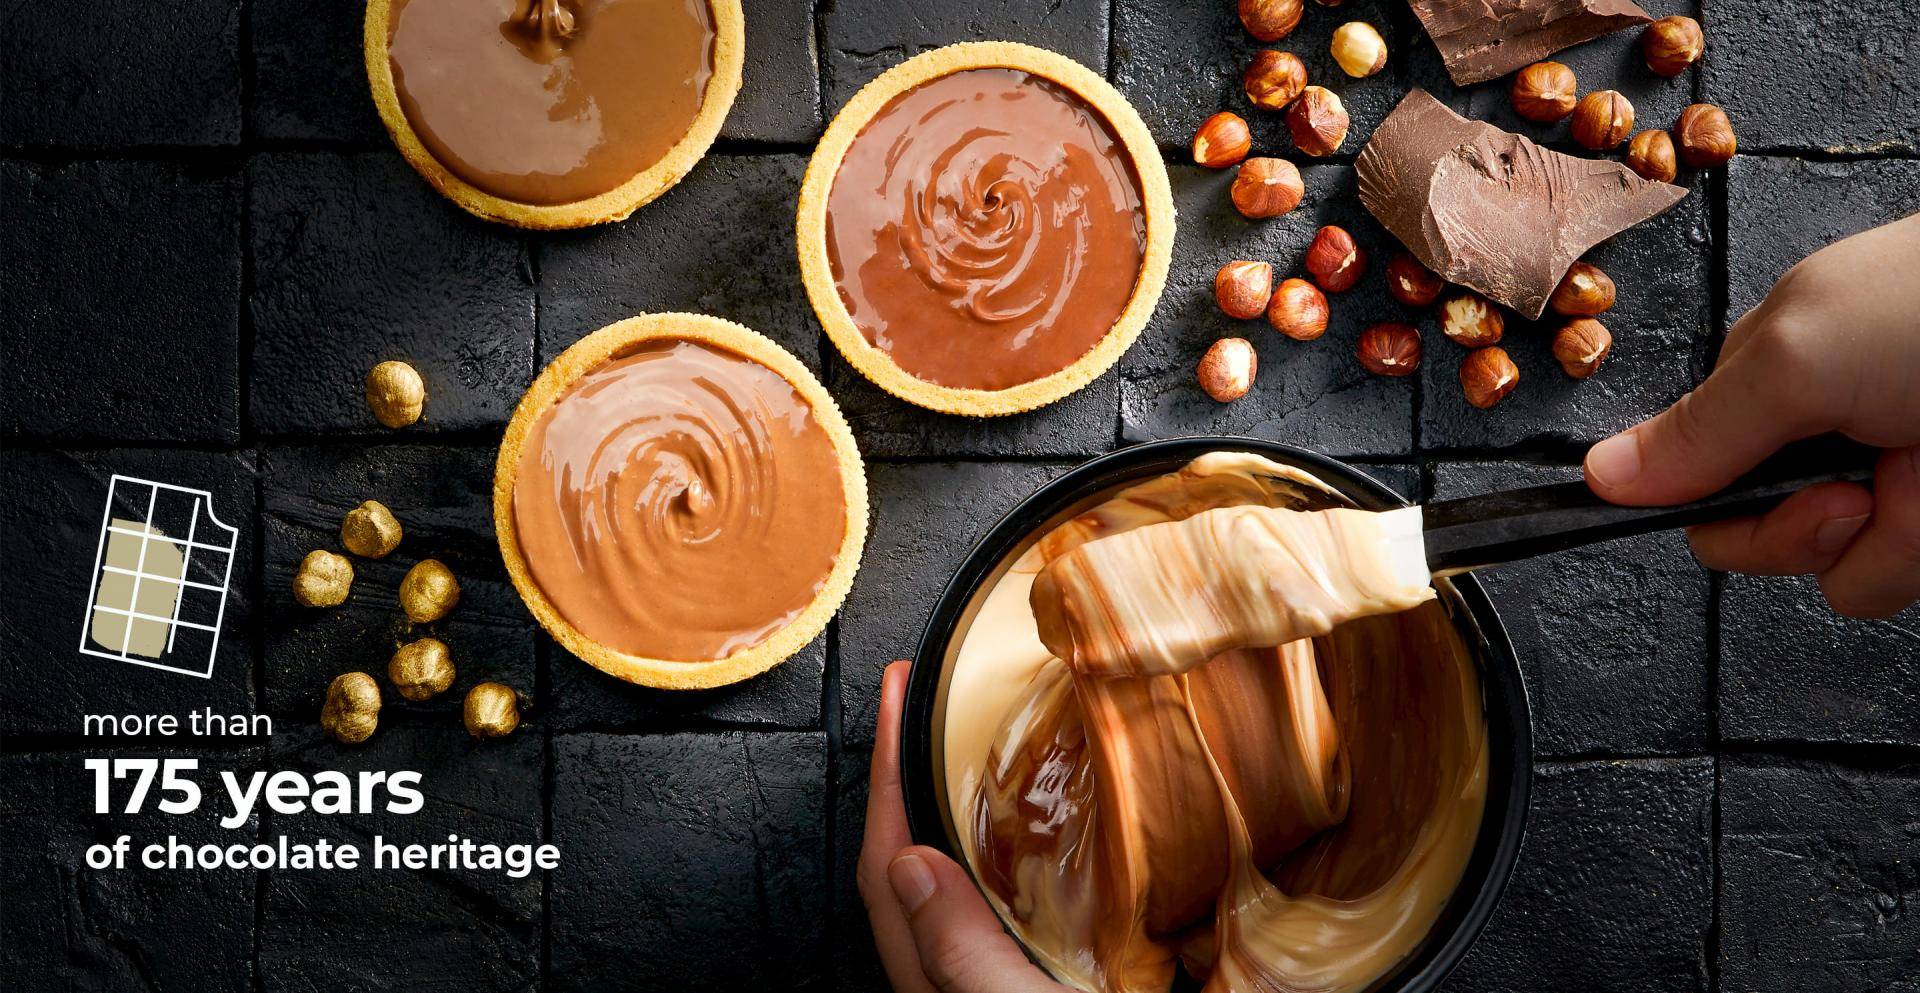 Heritage Fiscal Year 2019/20 Barry Callebaut